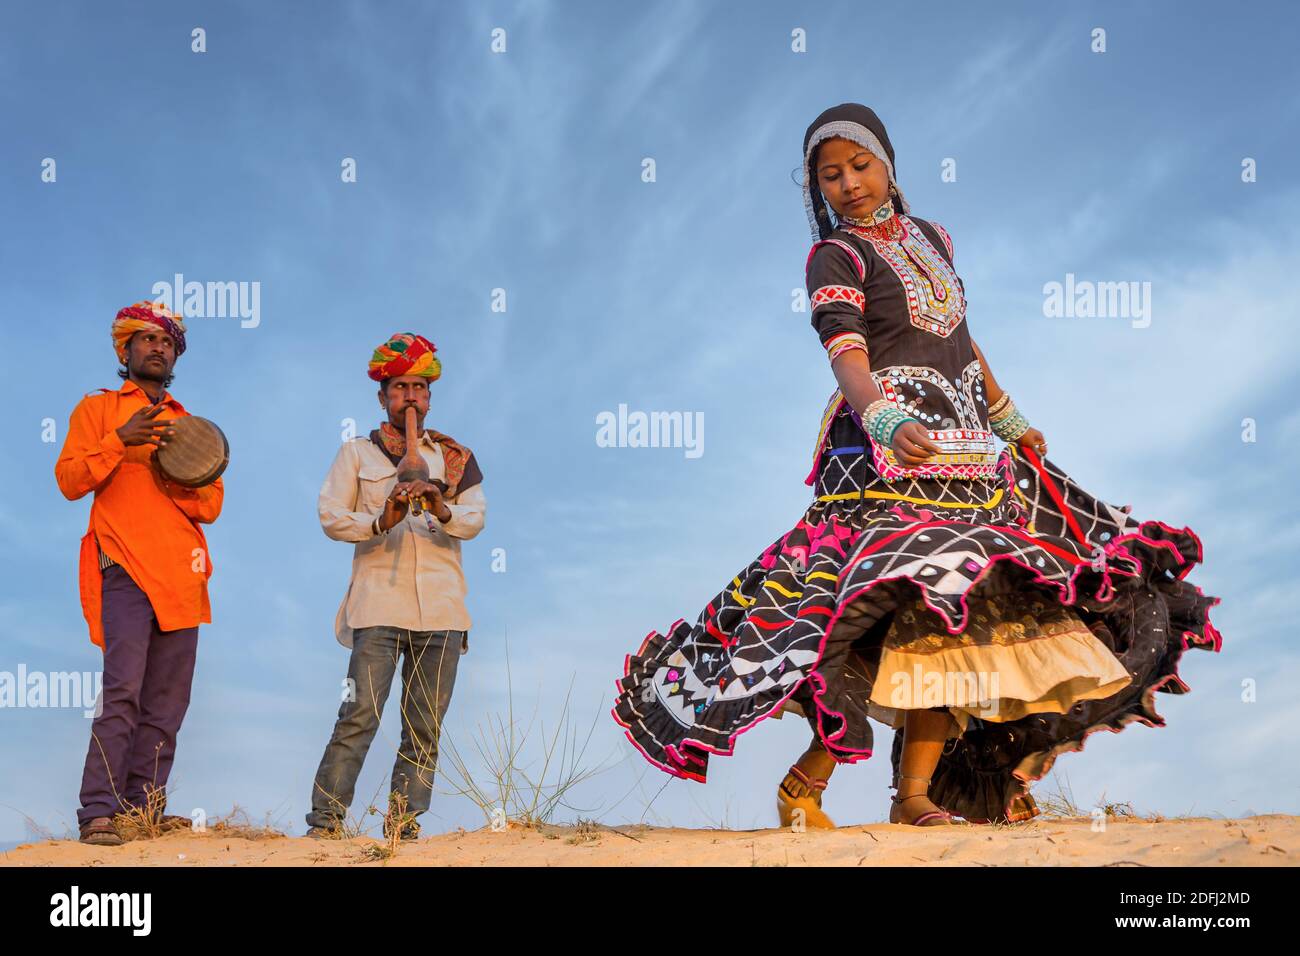 A gypsy woman dancing a traditional dance with two musicians, Pushkar, Rajasthan, India Stock Photo